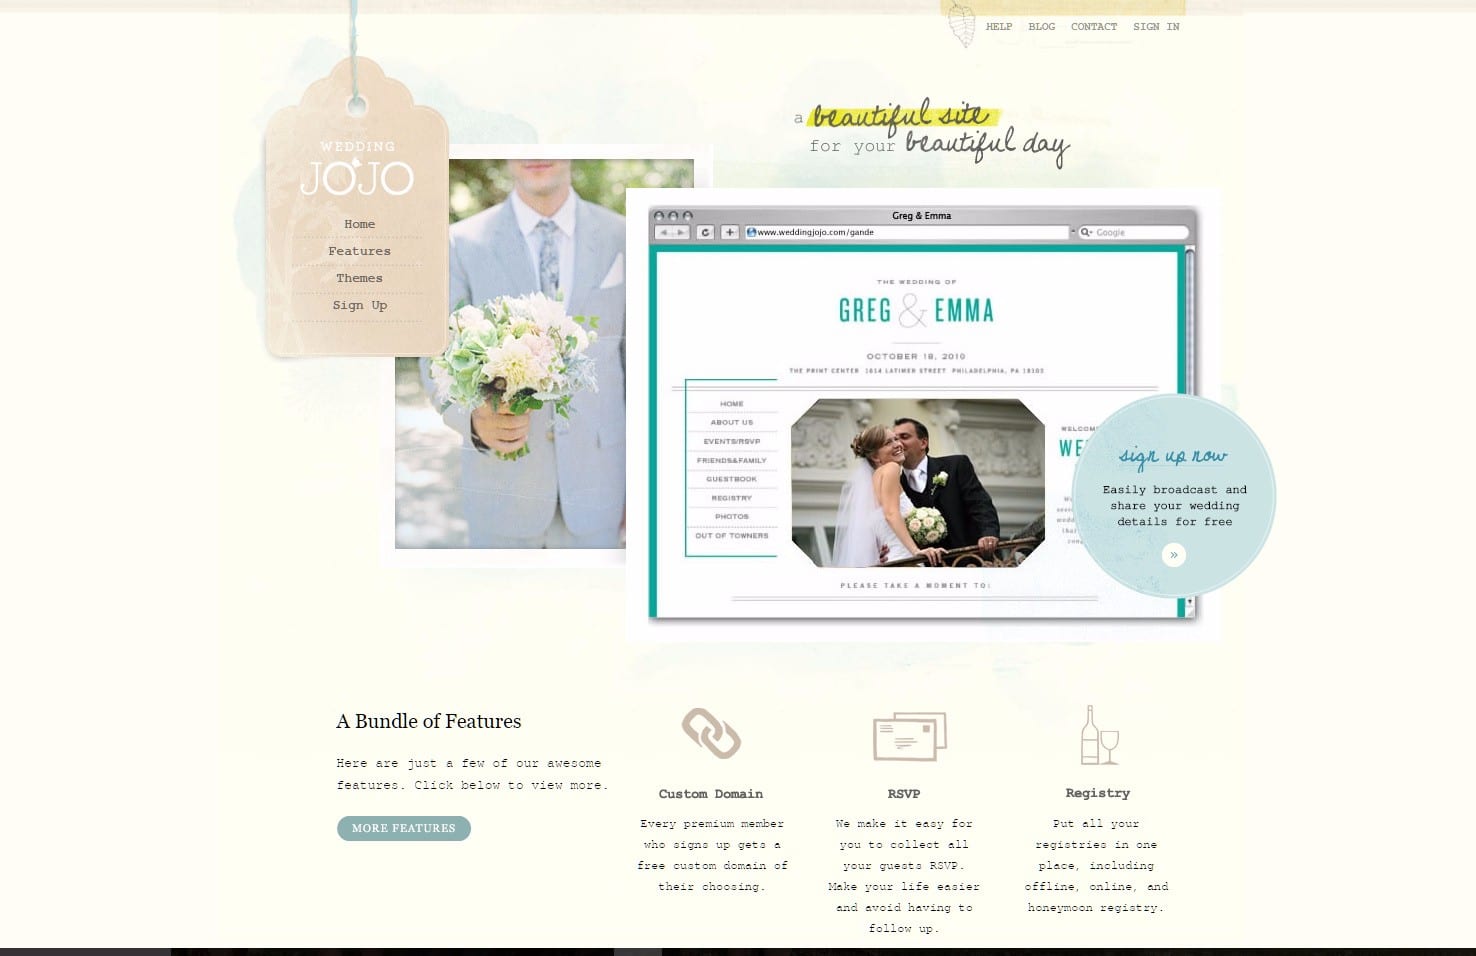 Wedding Jojo Wedding Websites Google Chrome 4282017 83846 PM.bmp Seattle and Snohomish Wedding and Engagement Photography by GSquared Weddings Photography